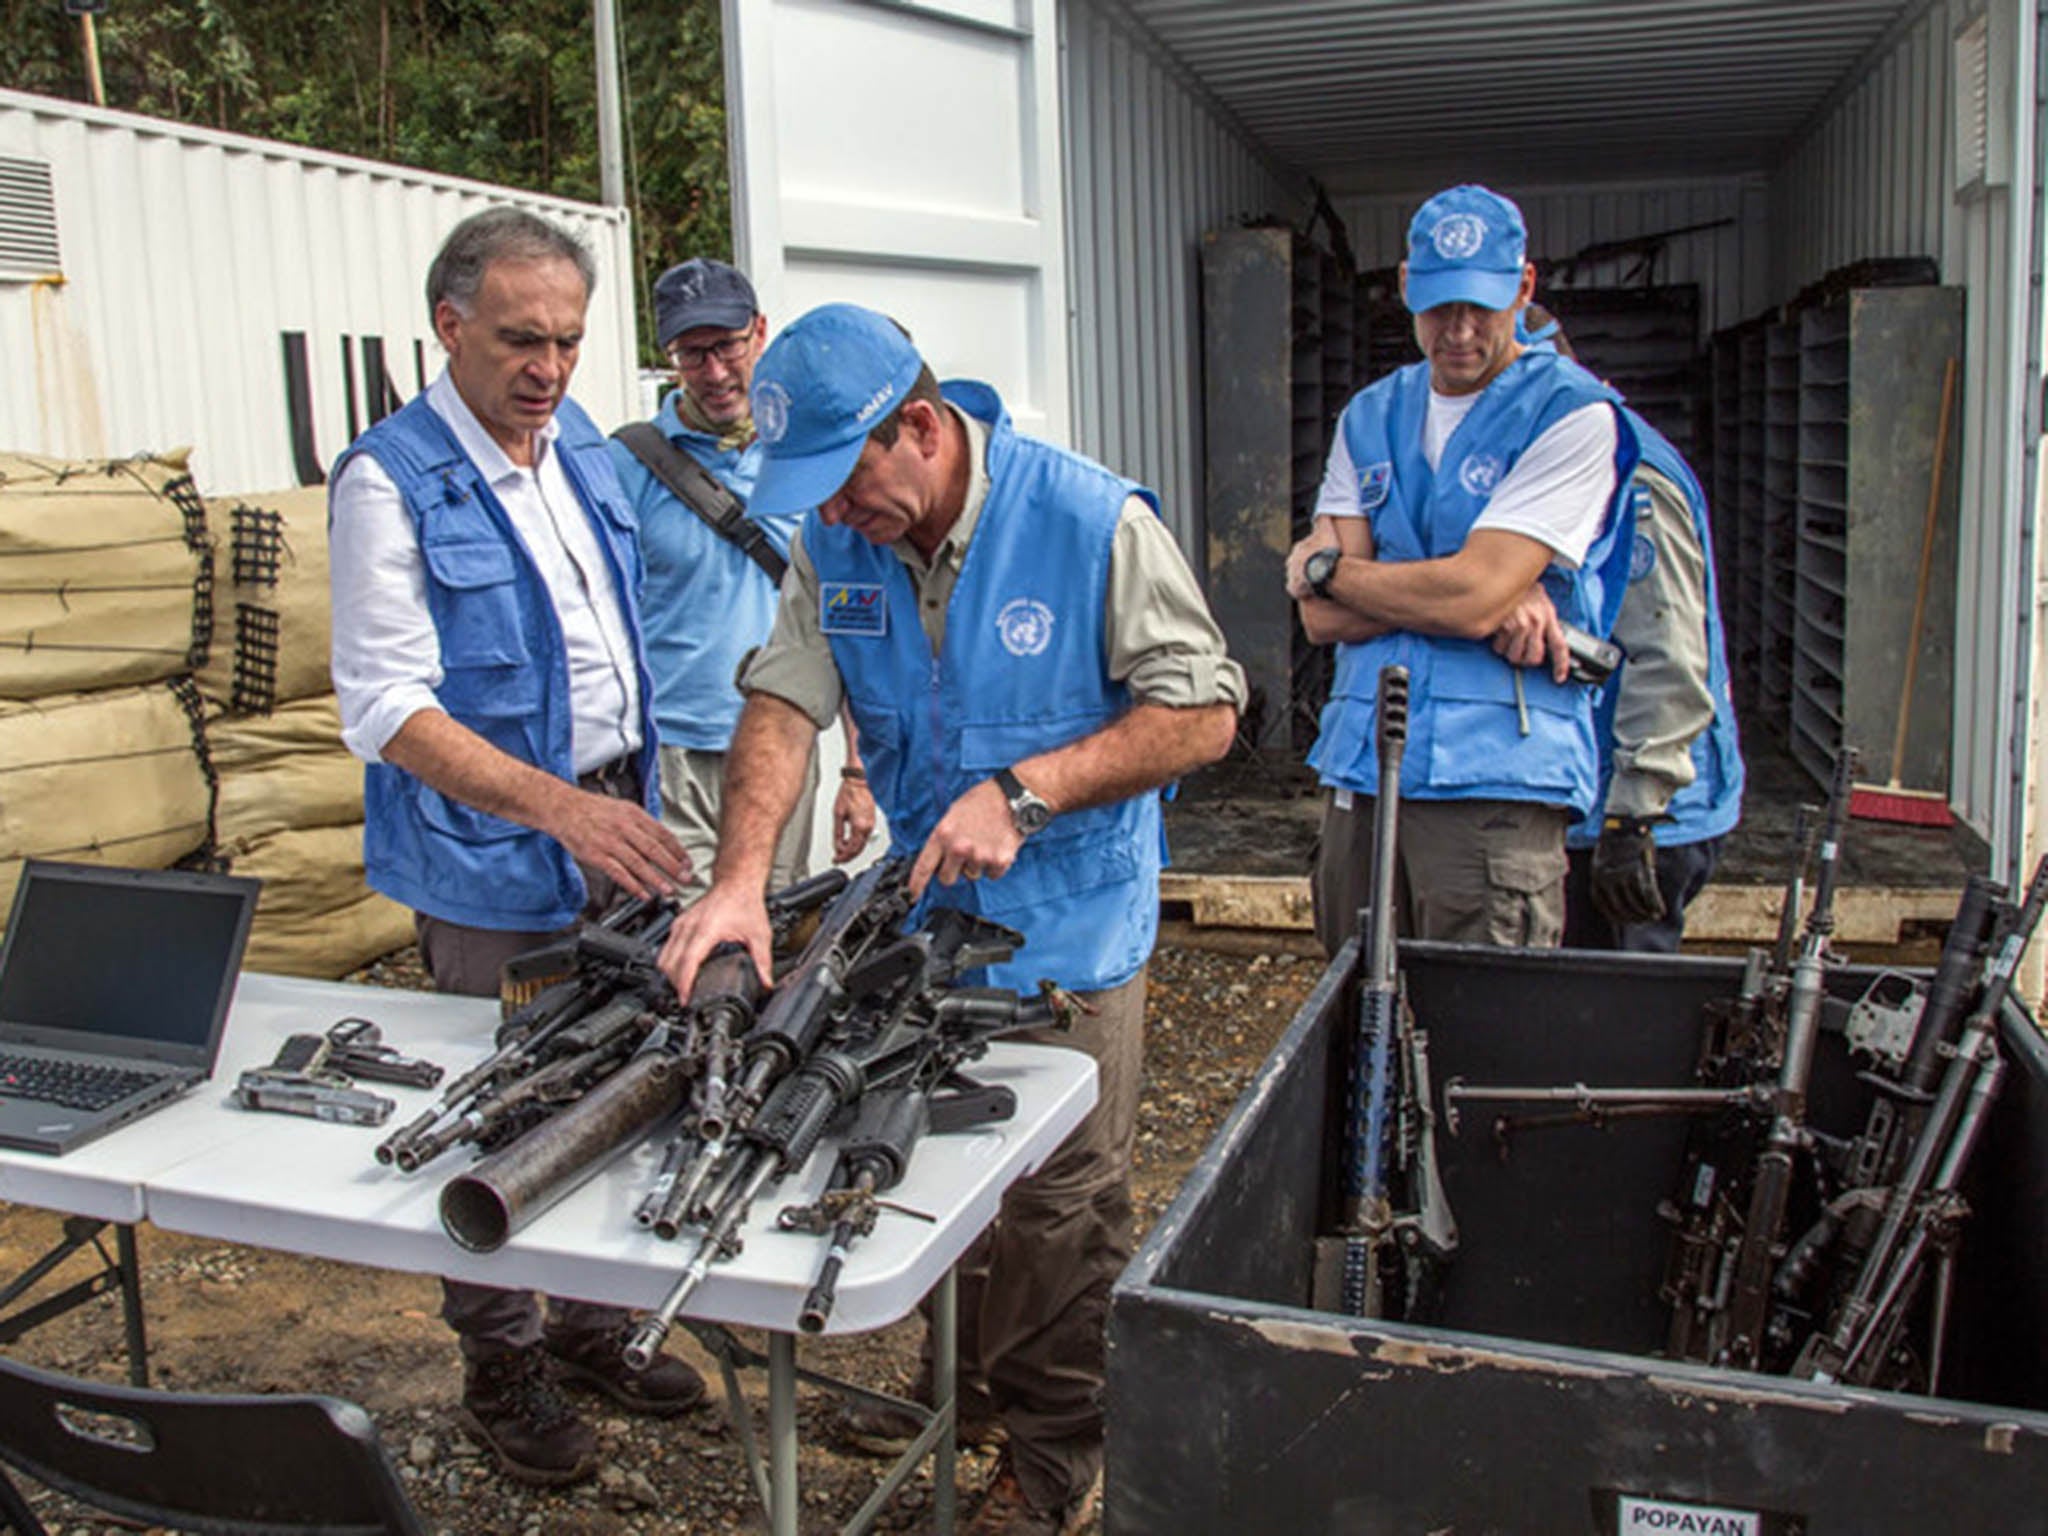 &#13;
UN staff examine weapons handed in by former &#13;